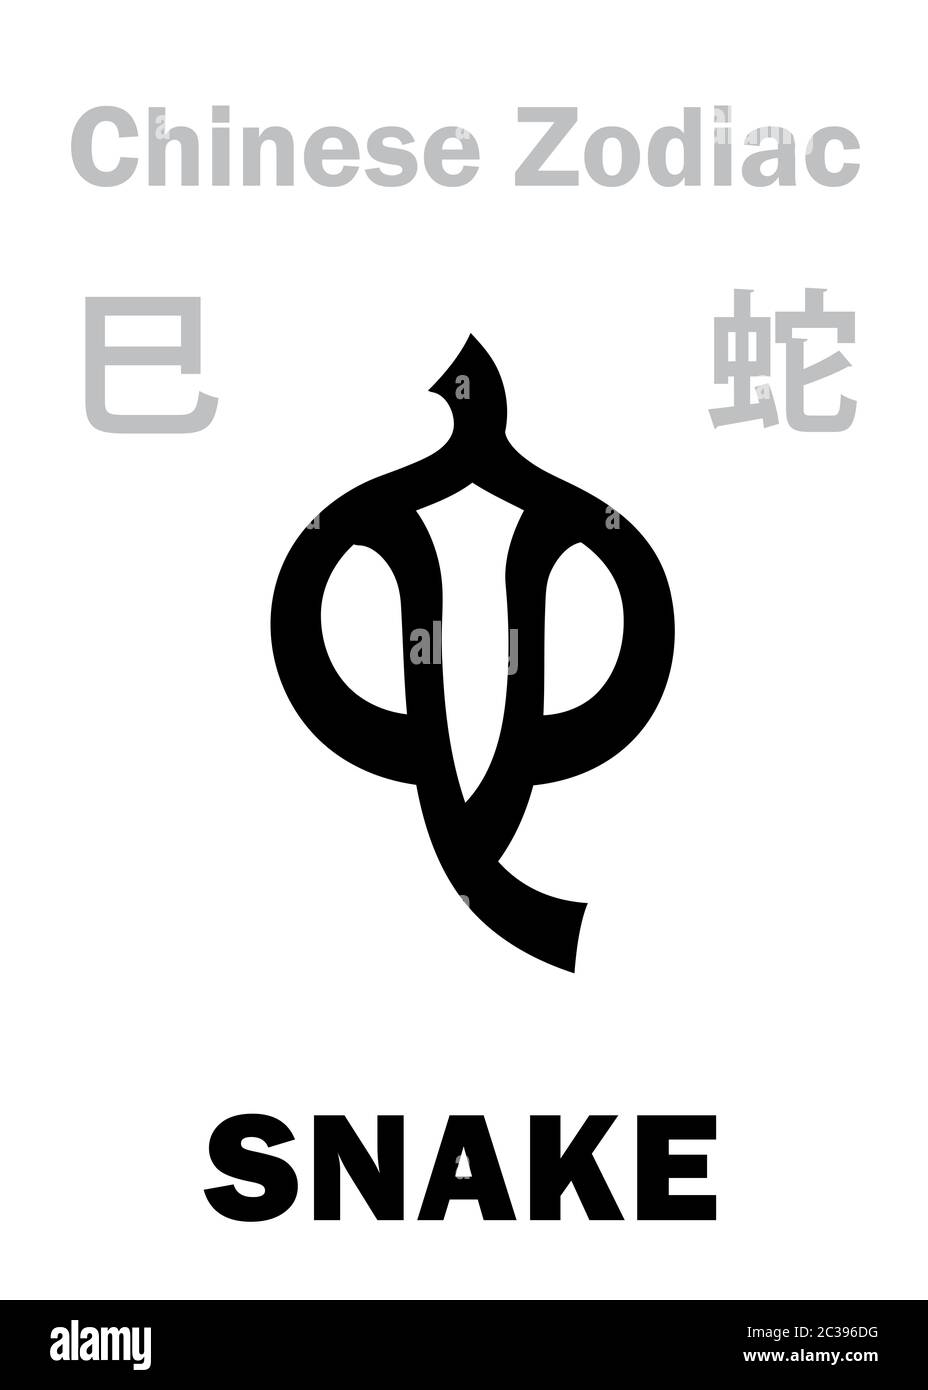 Astrology: SNAKE (sign of Chinese Zodiac) Stock Photo